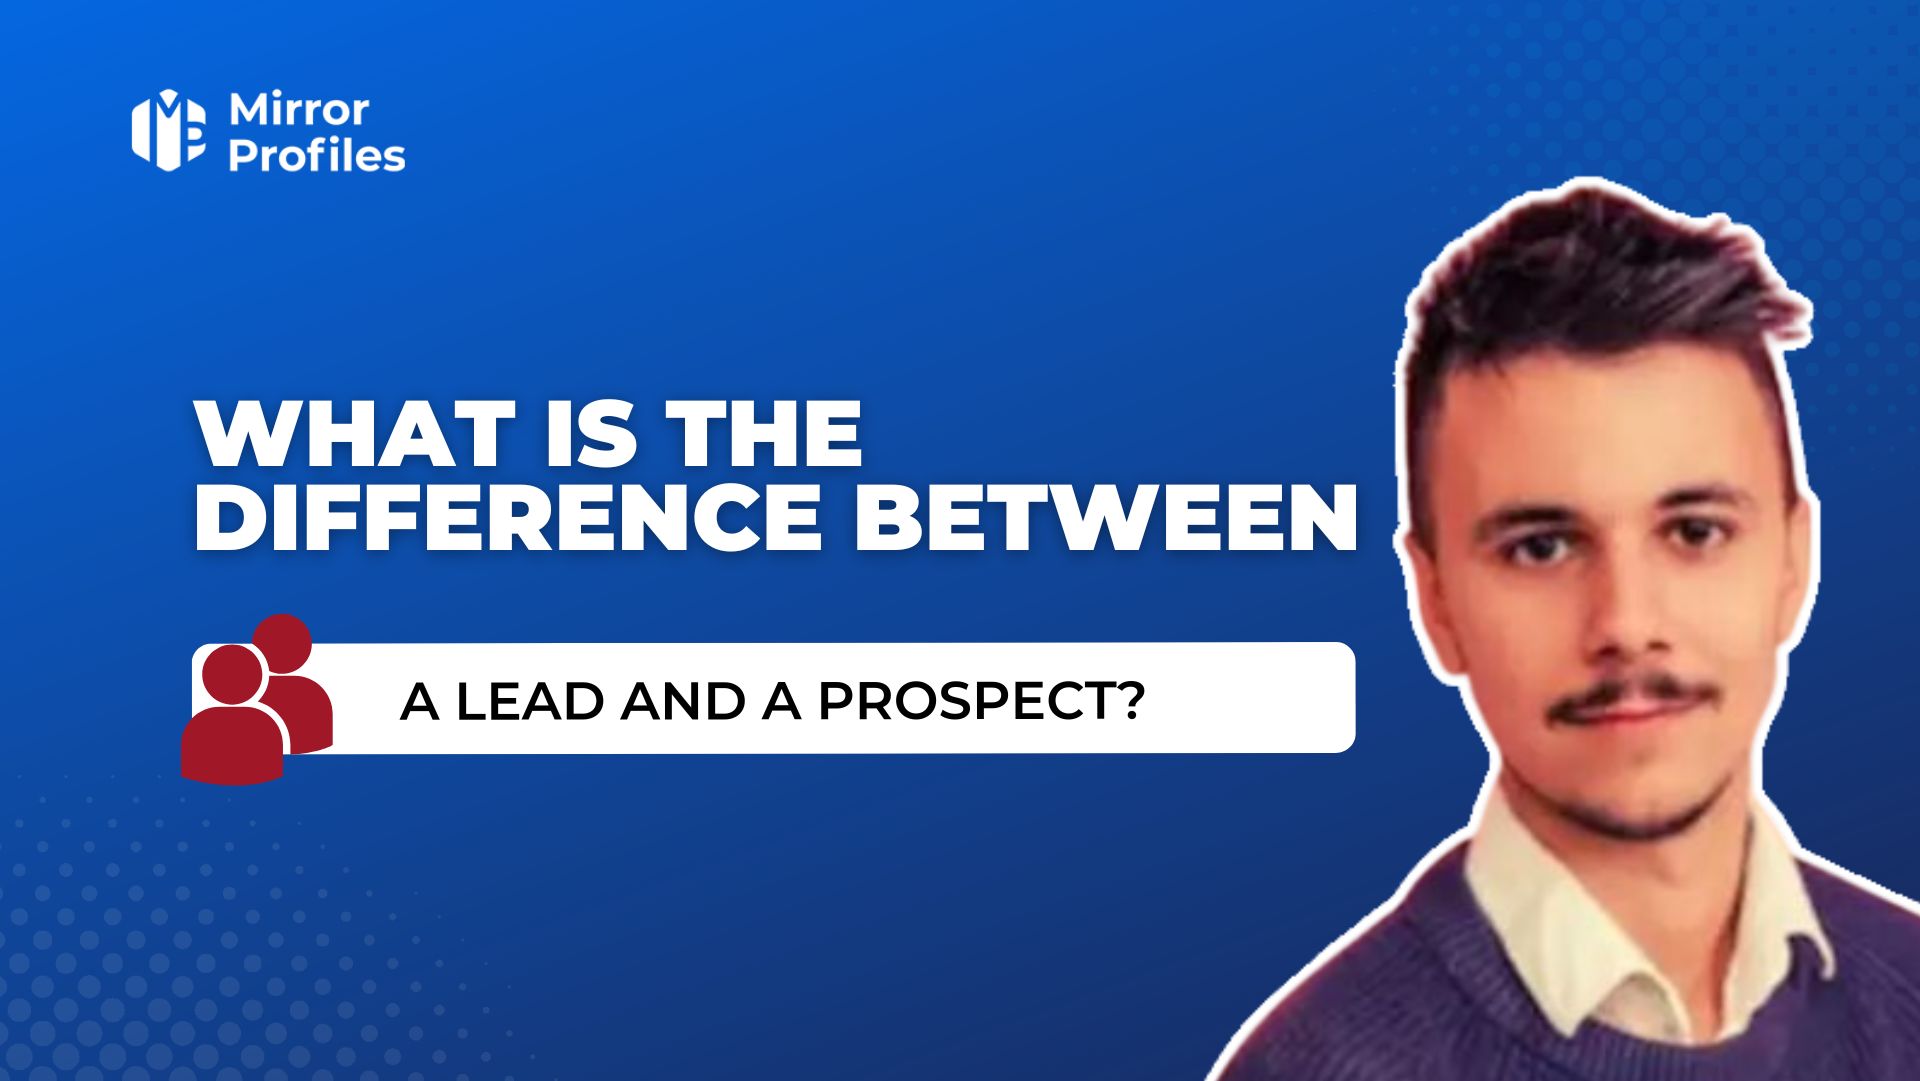 What is the difference between a lead and a prospect?